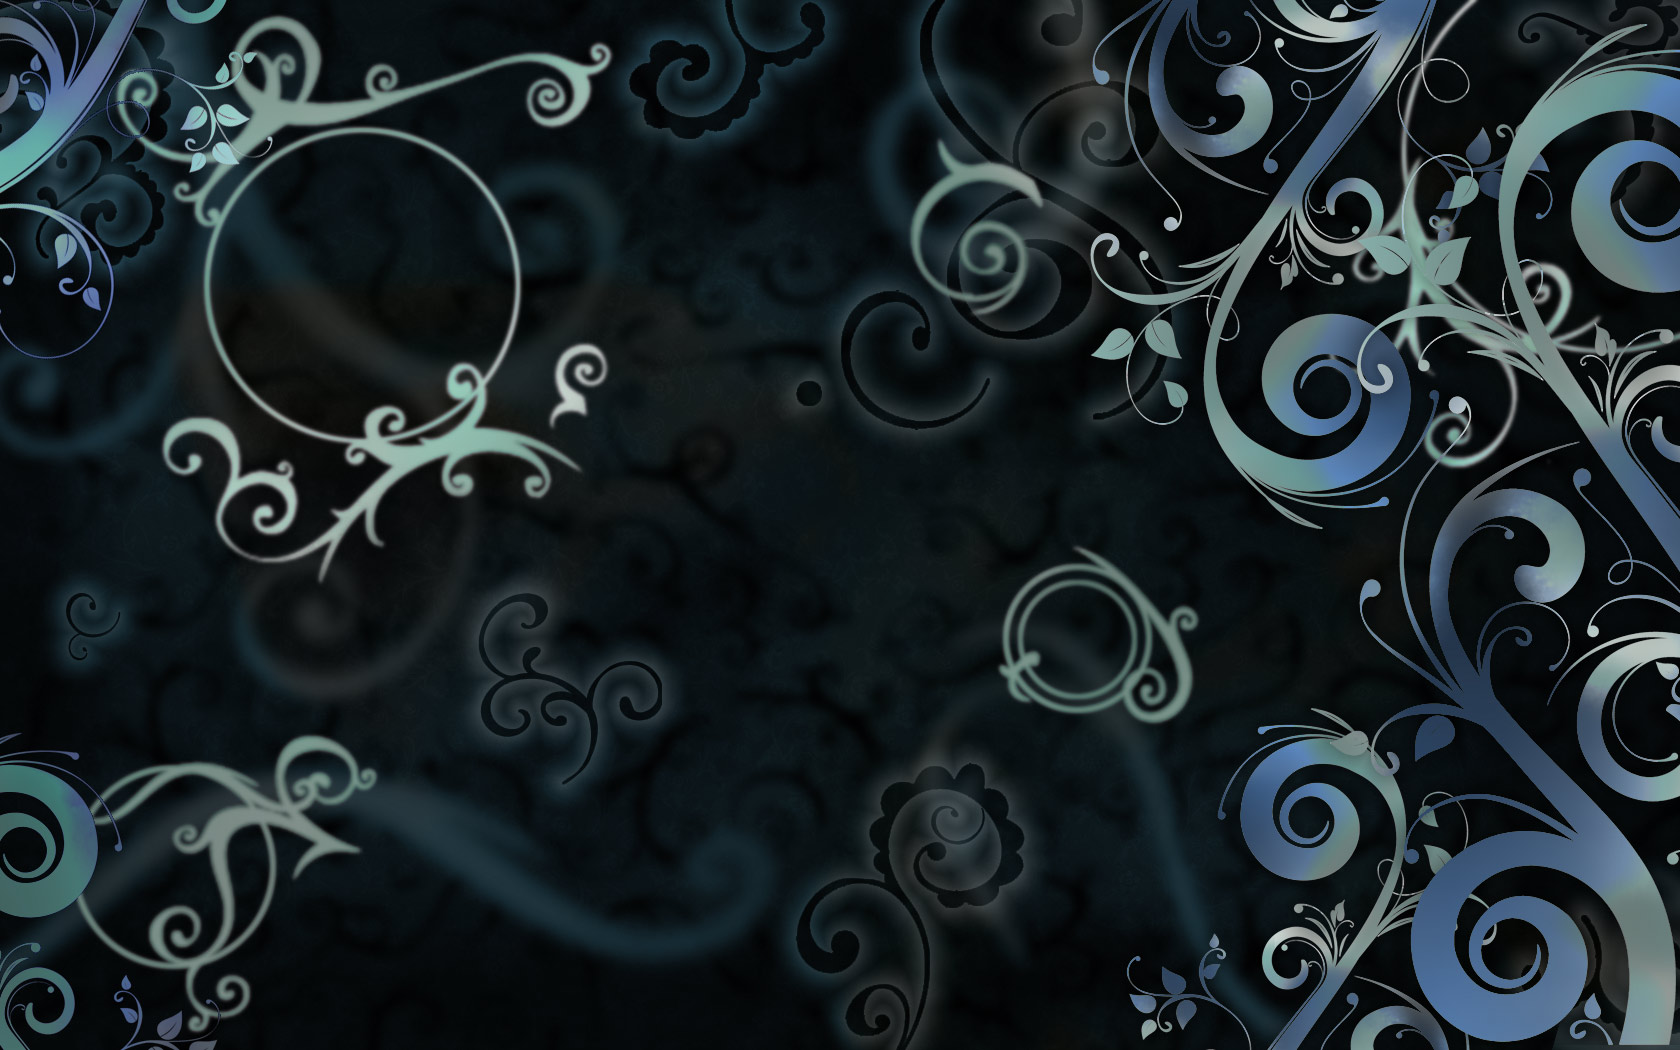 Swirl wallpaper by TheLordNecro Swirl wallpaper by TheLordNecro